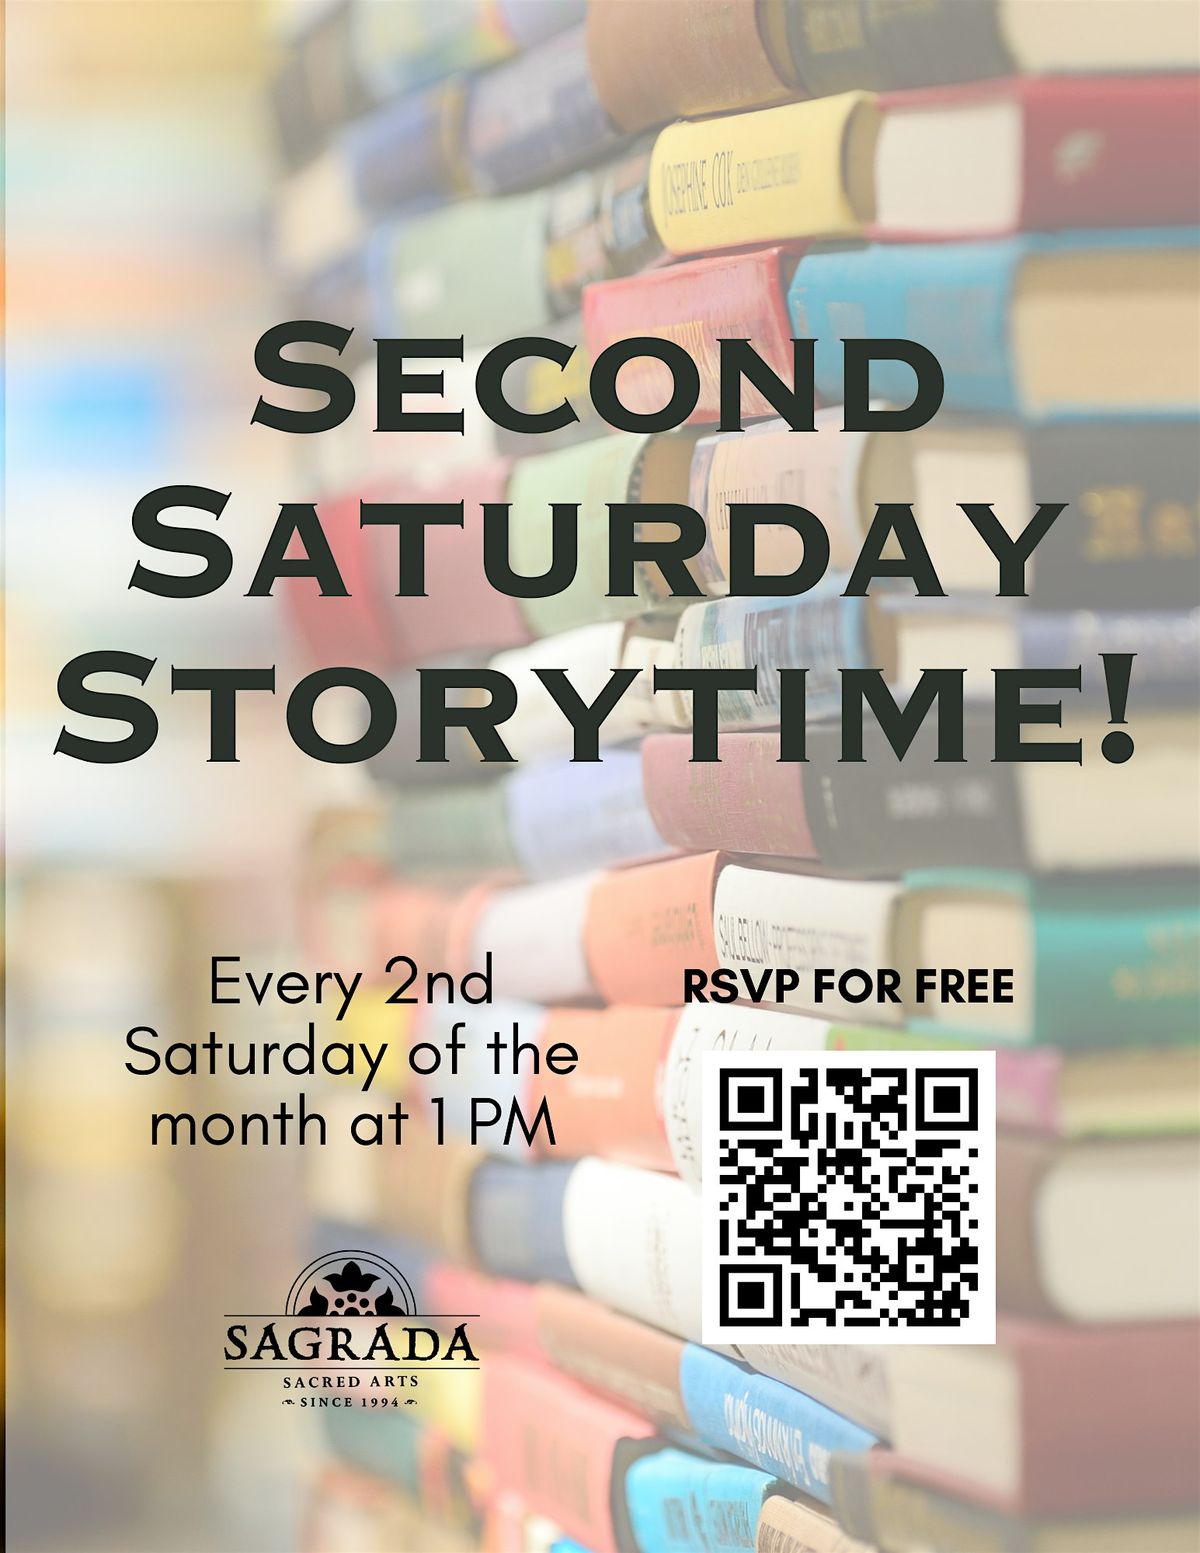 Second Saturday Storytime!